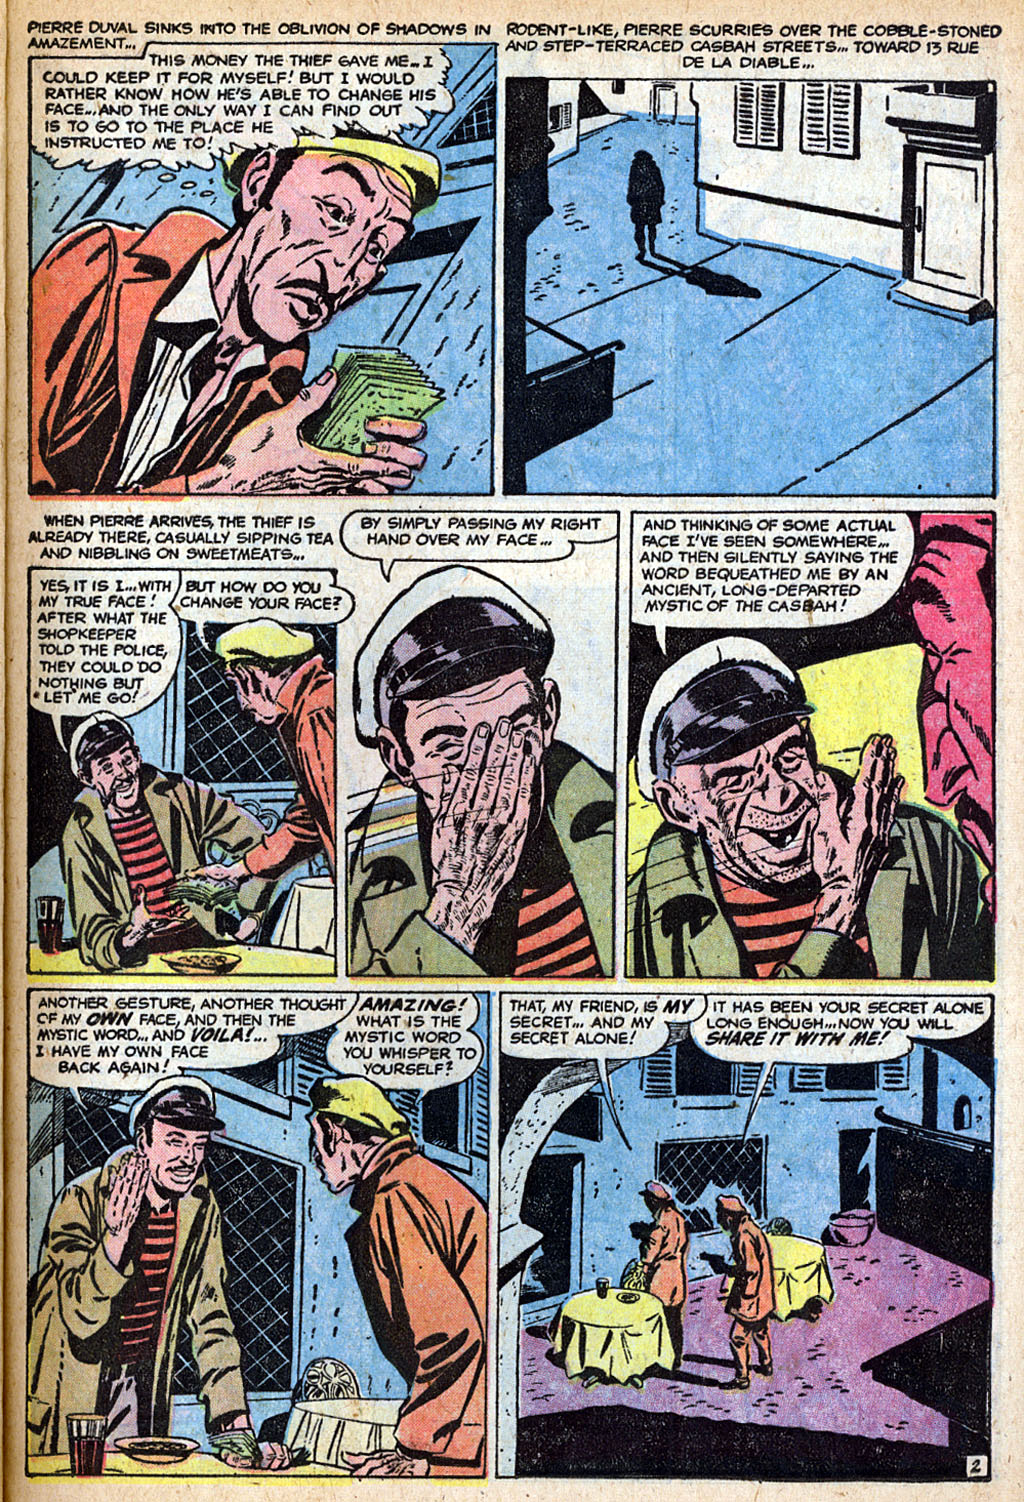 Marvel Tales (1949) 156 Page 12